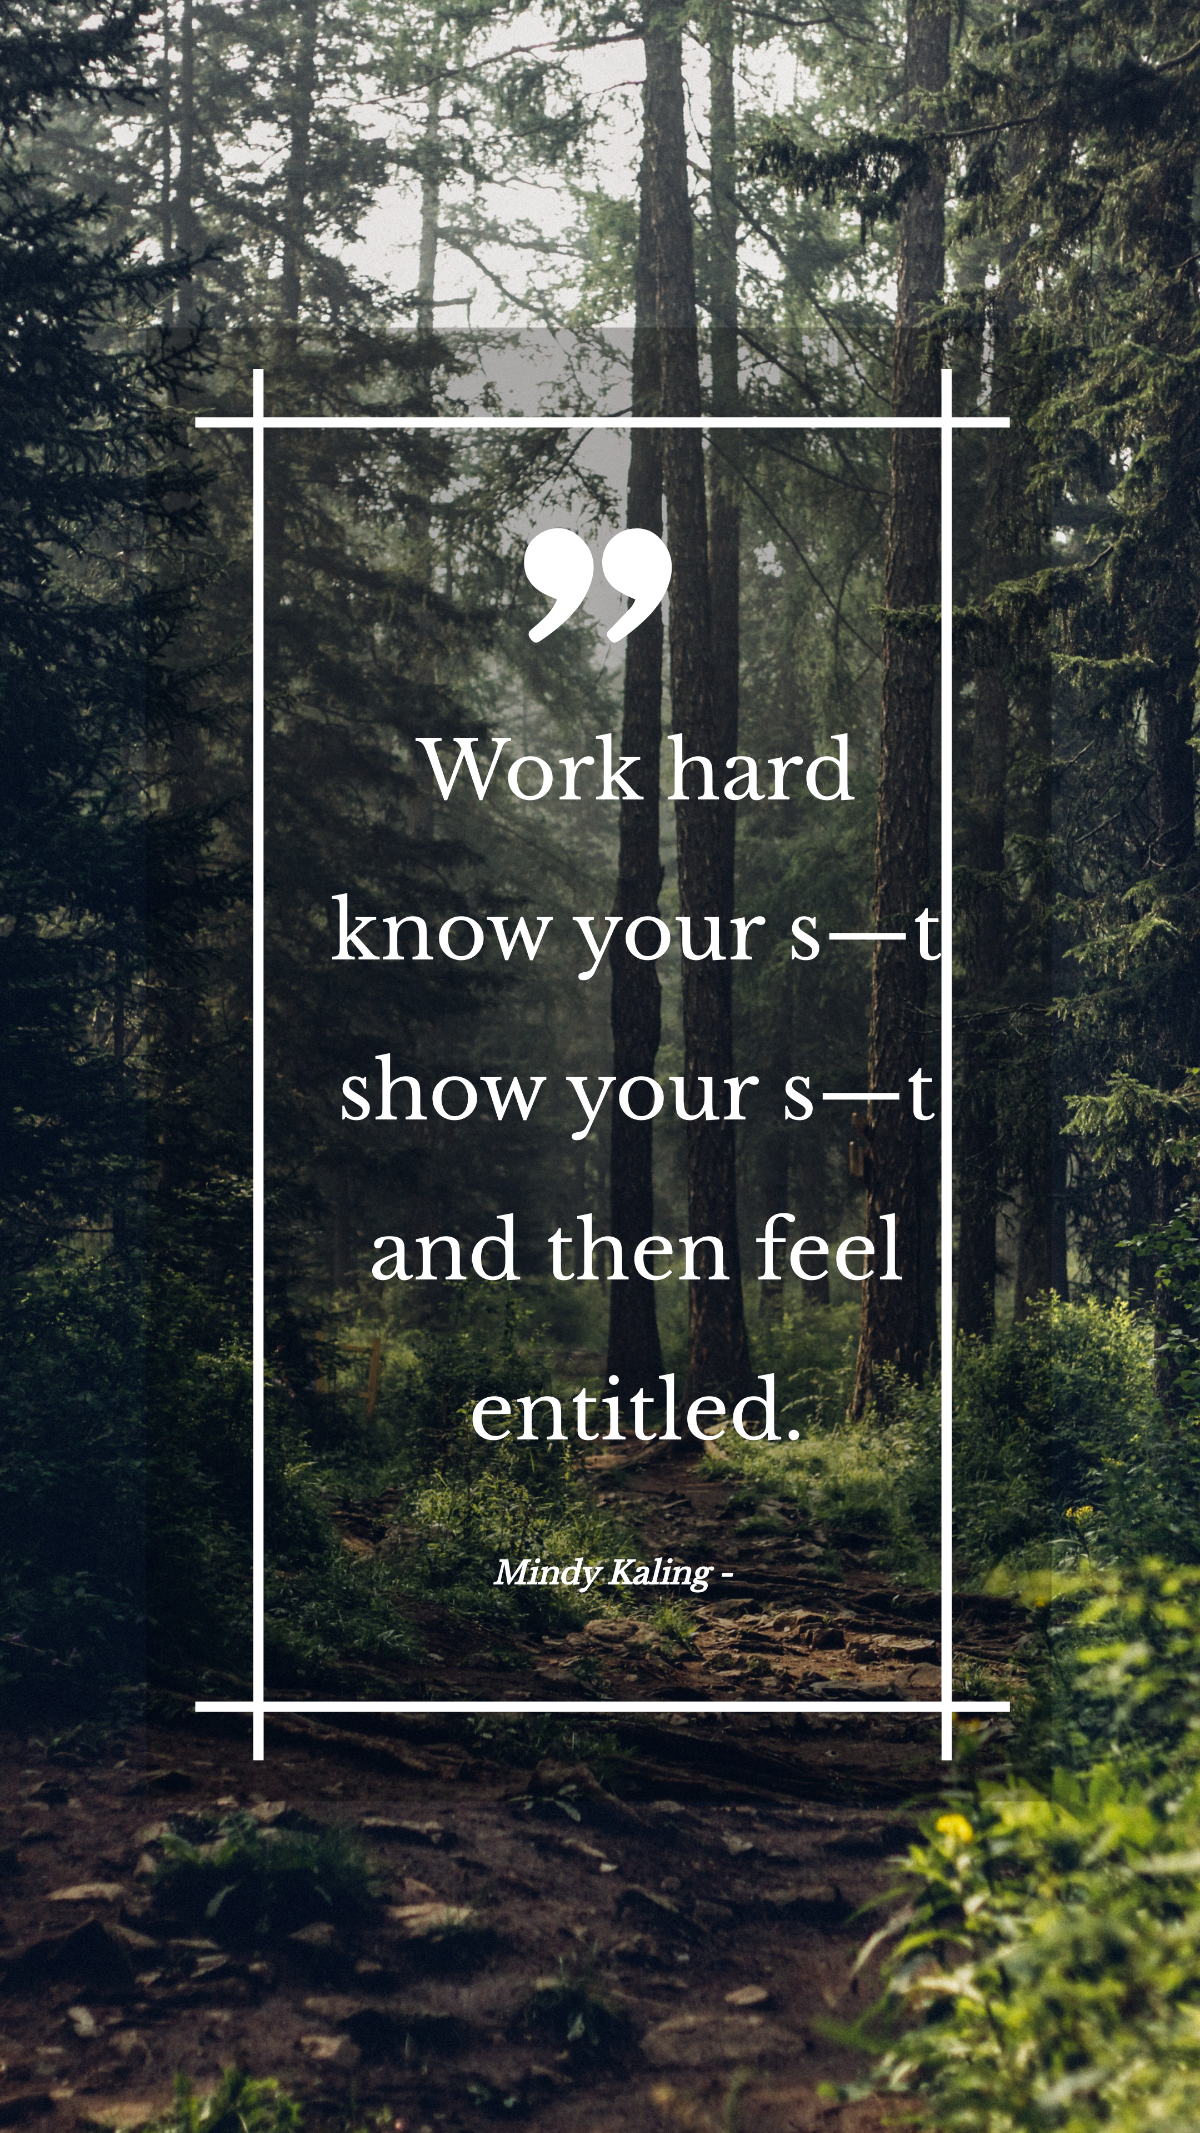 Mindy Kaling - Work hard know your s—t show your s—t and then feel entitled.